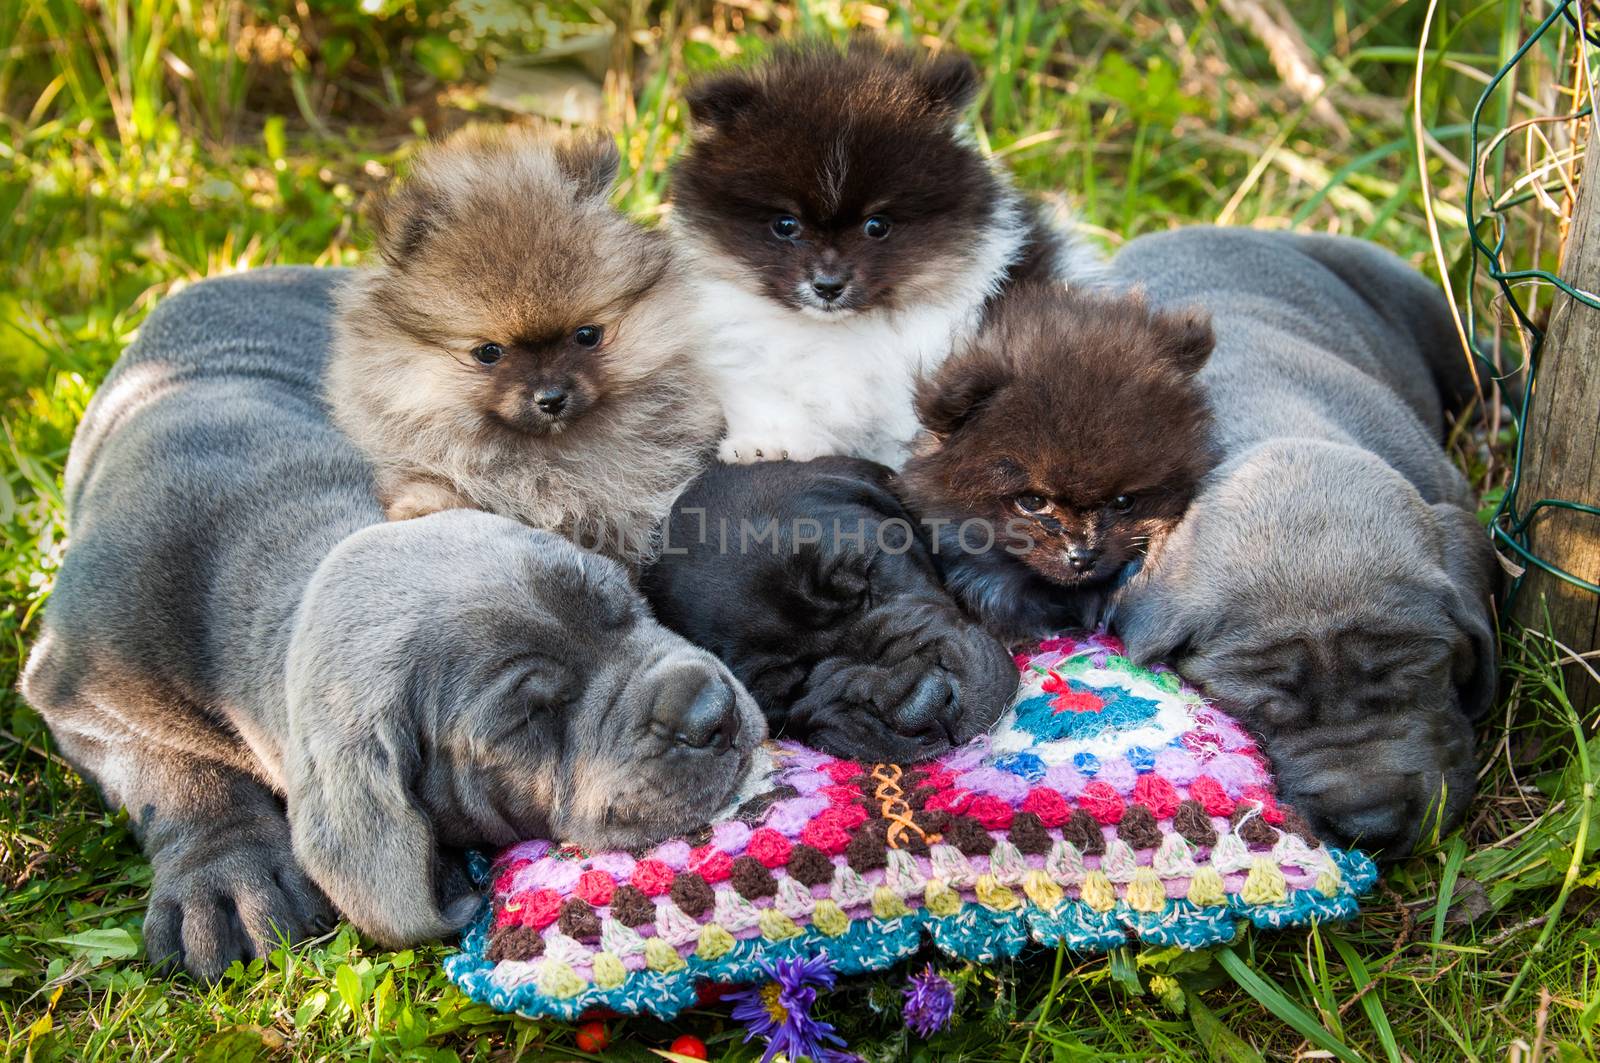 Great Dane dogs and Pomeranian Spitz puppies by infinityyy